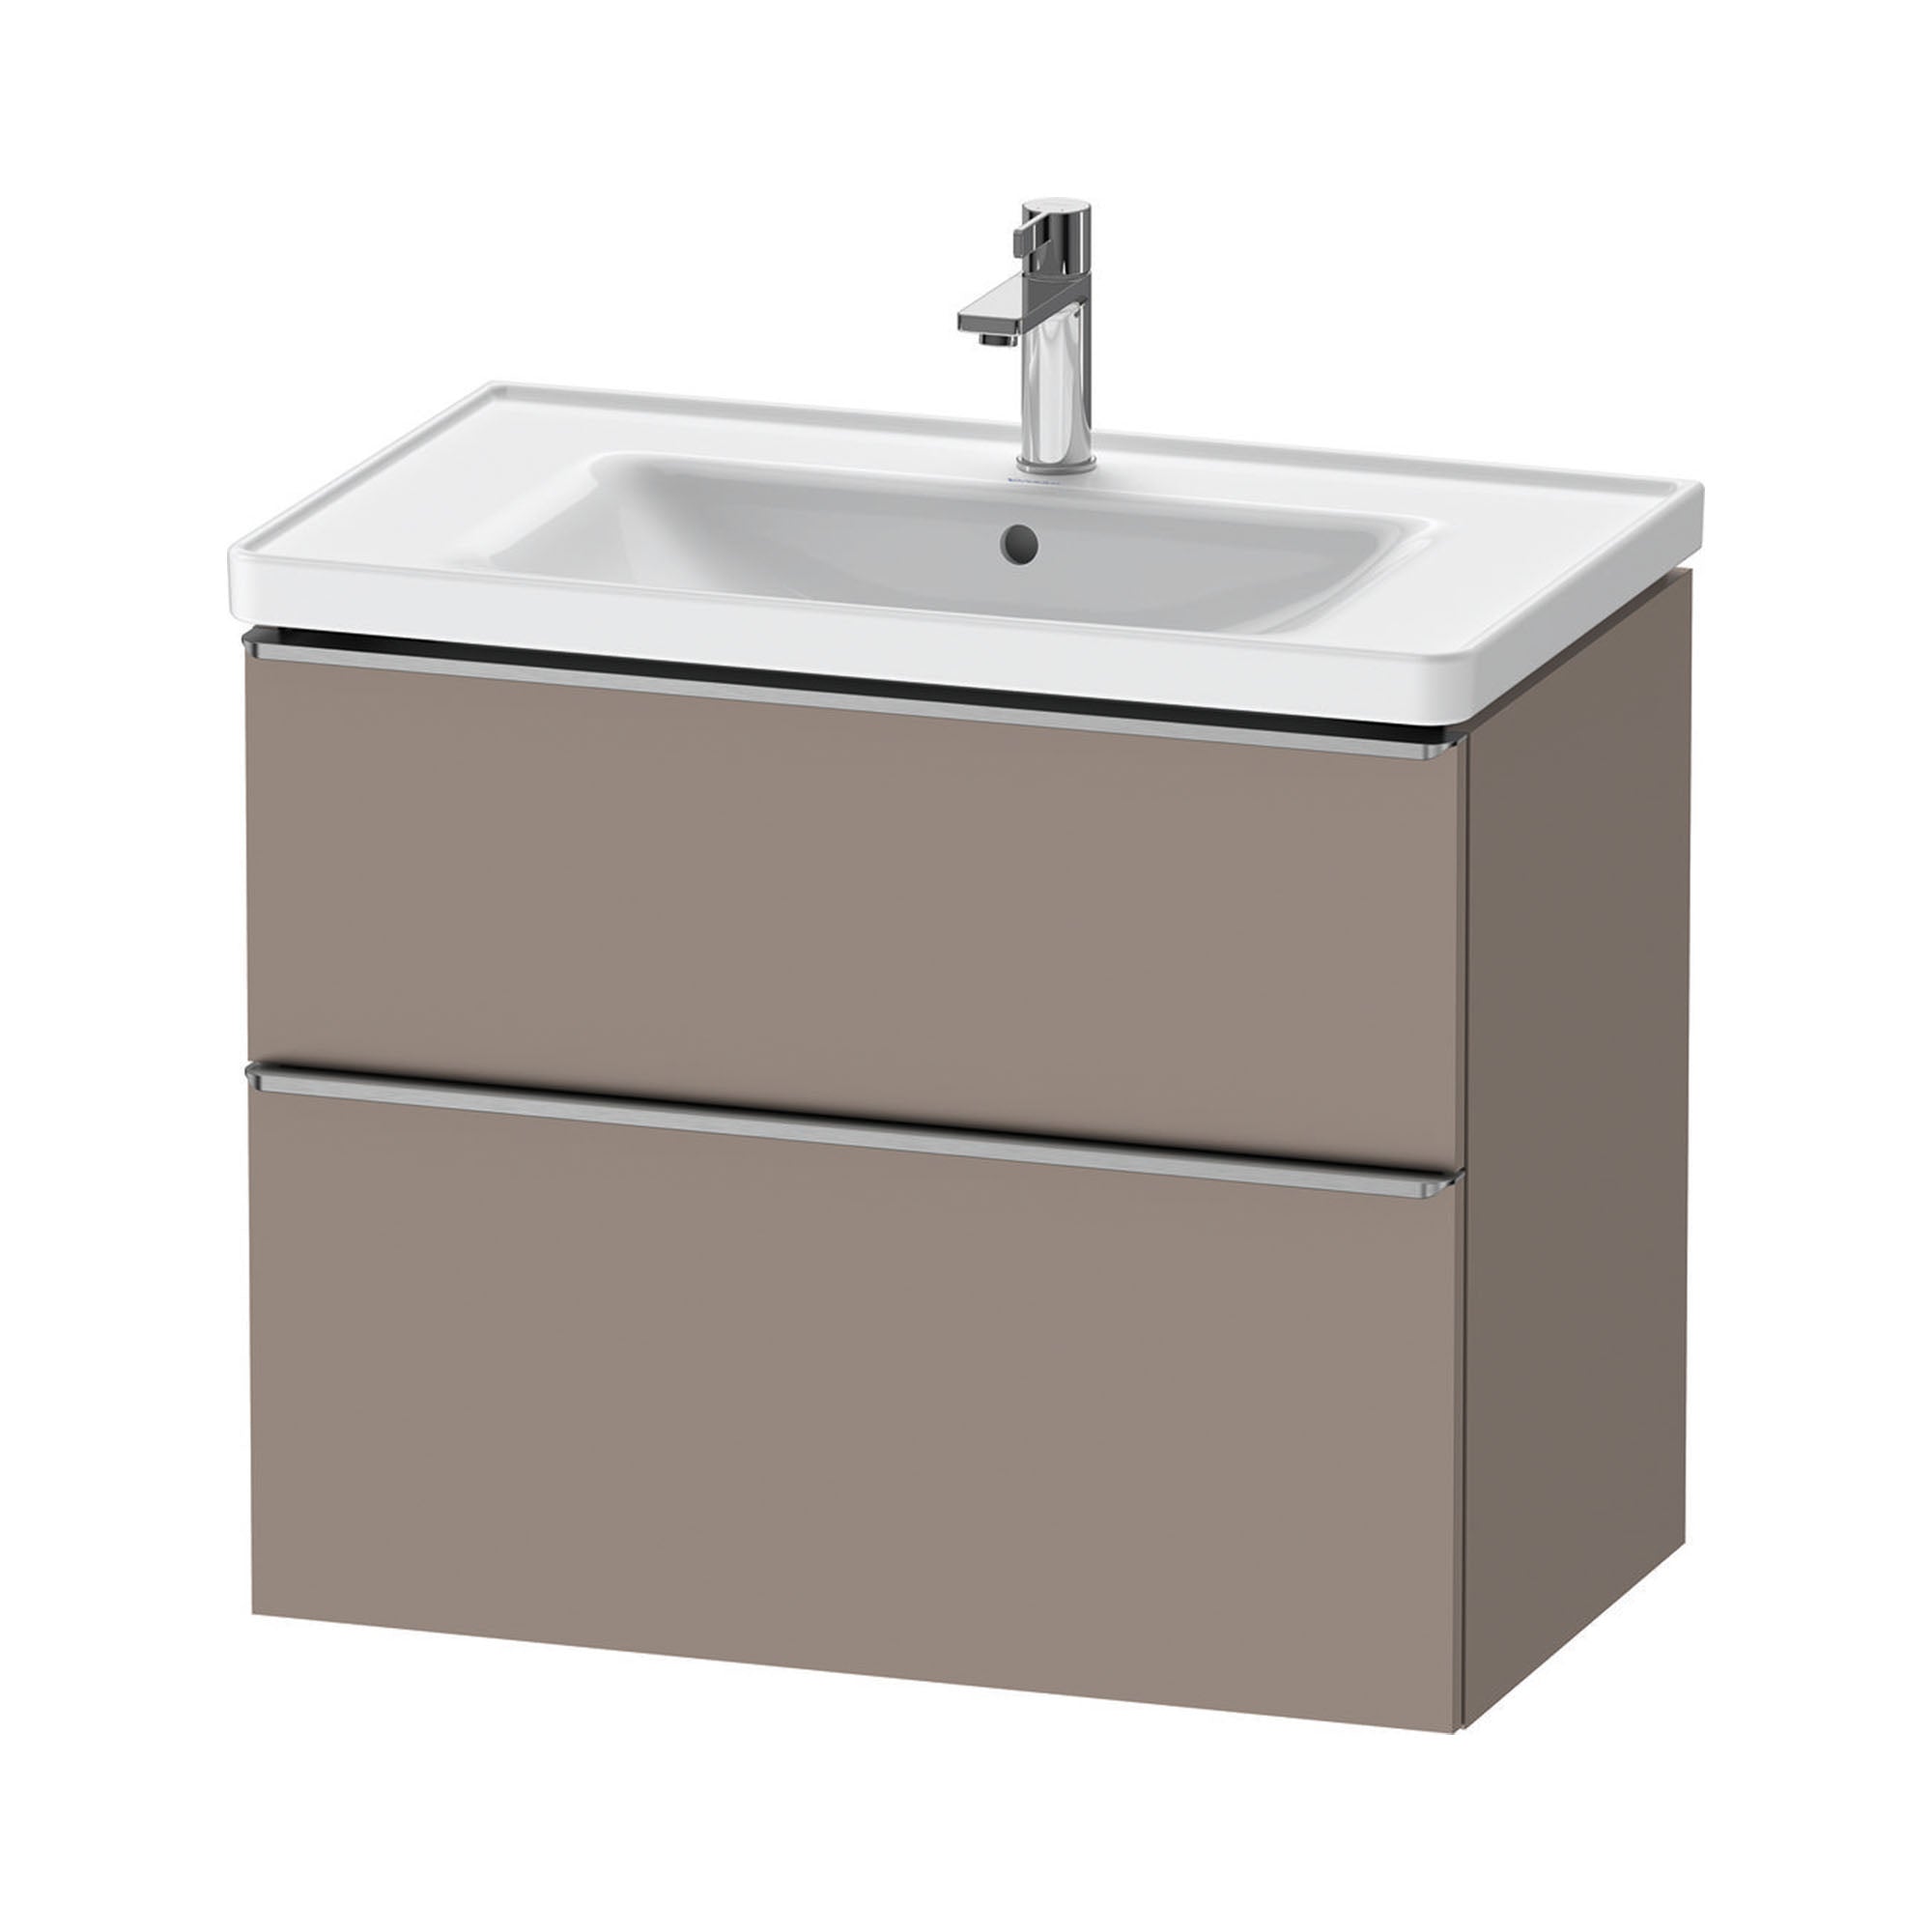 duravit d-neo 800mm wall mounted vanity unit with d-neo basin basalt stainless steel handles